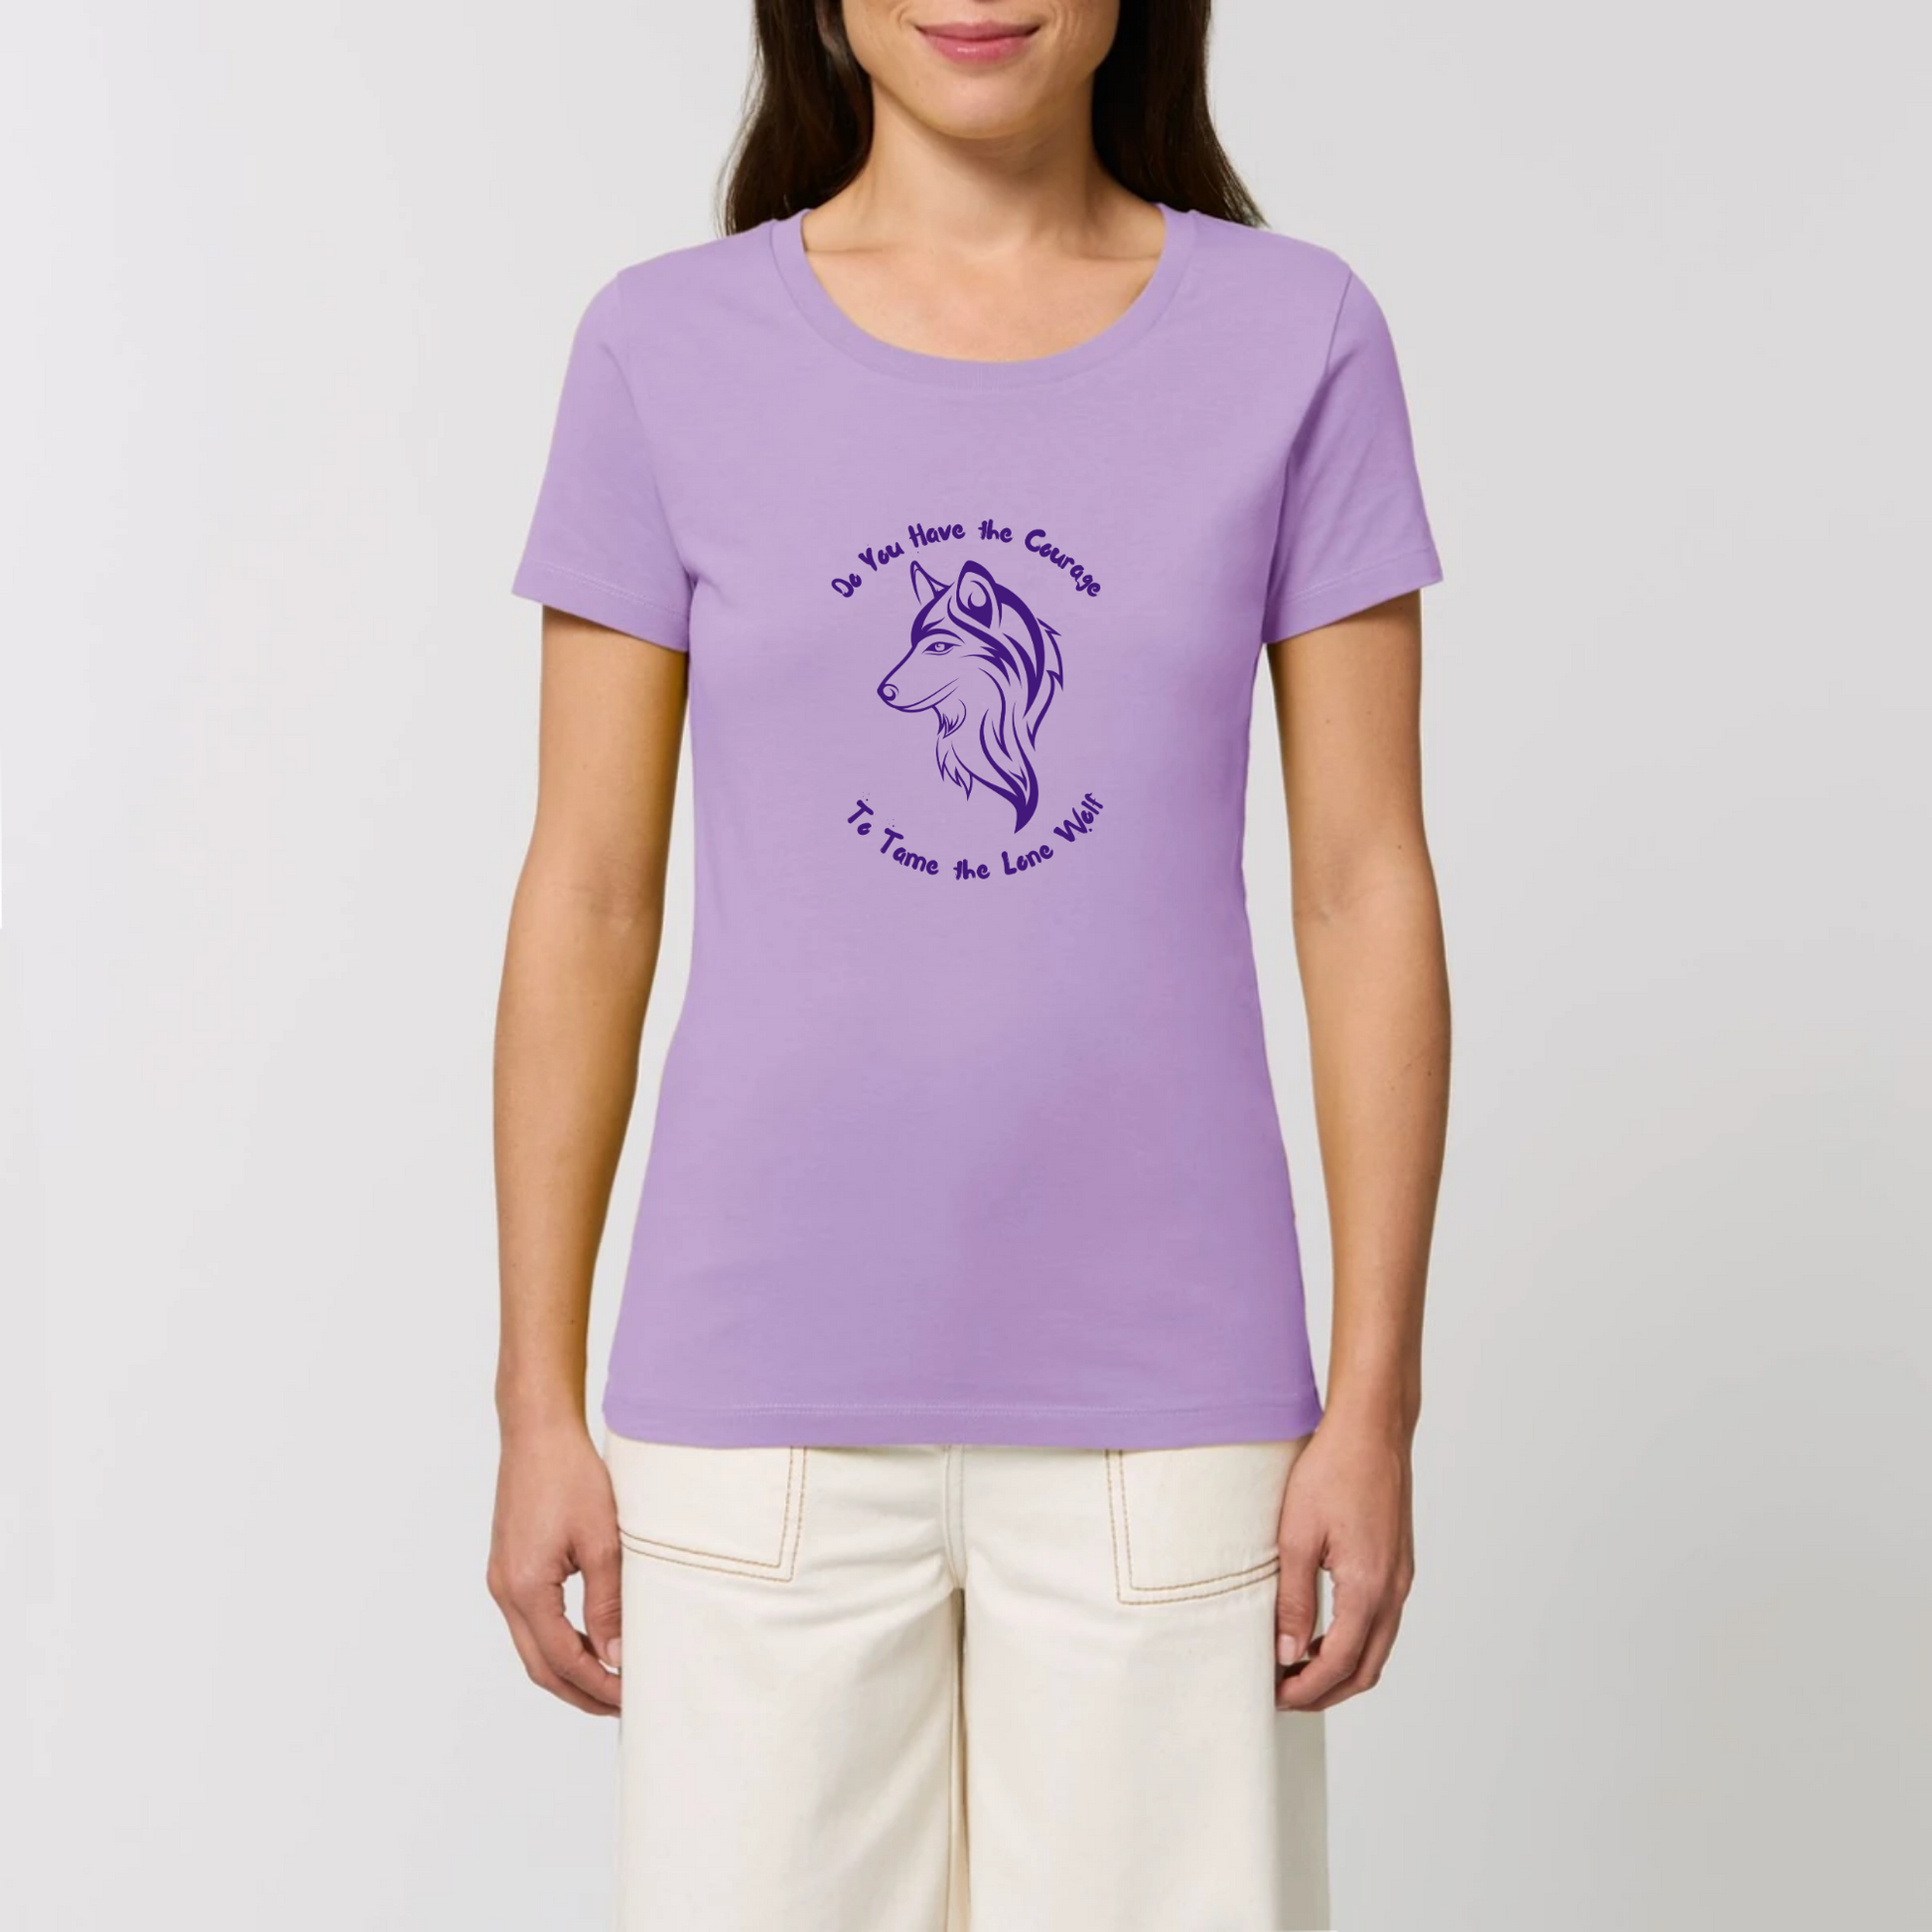 Graphic design t-shirt for women which features a feminine wolf head with wording above and below the wolf head saying Do You Have the Courage to Tame the Lone Wolf. The t-shirt is lavender